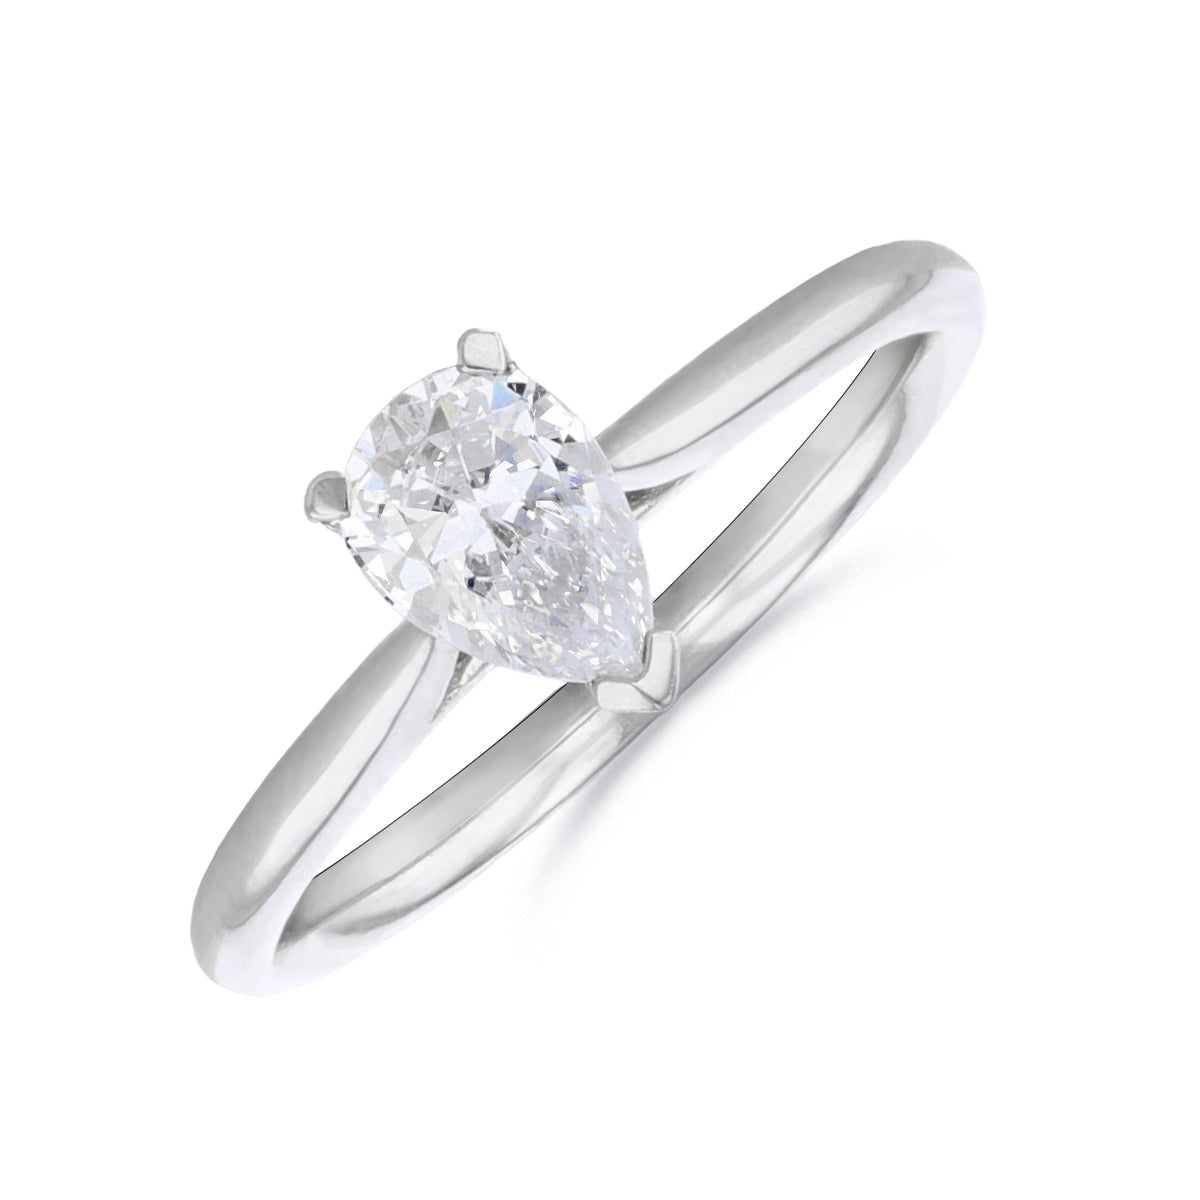 1.00ct Ophelia Pear Cut Diamond Solitaire Engagement Ring | 18ct White Gold